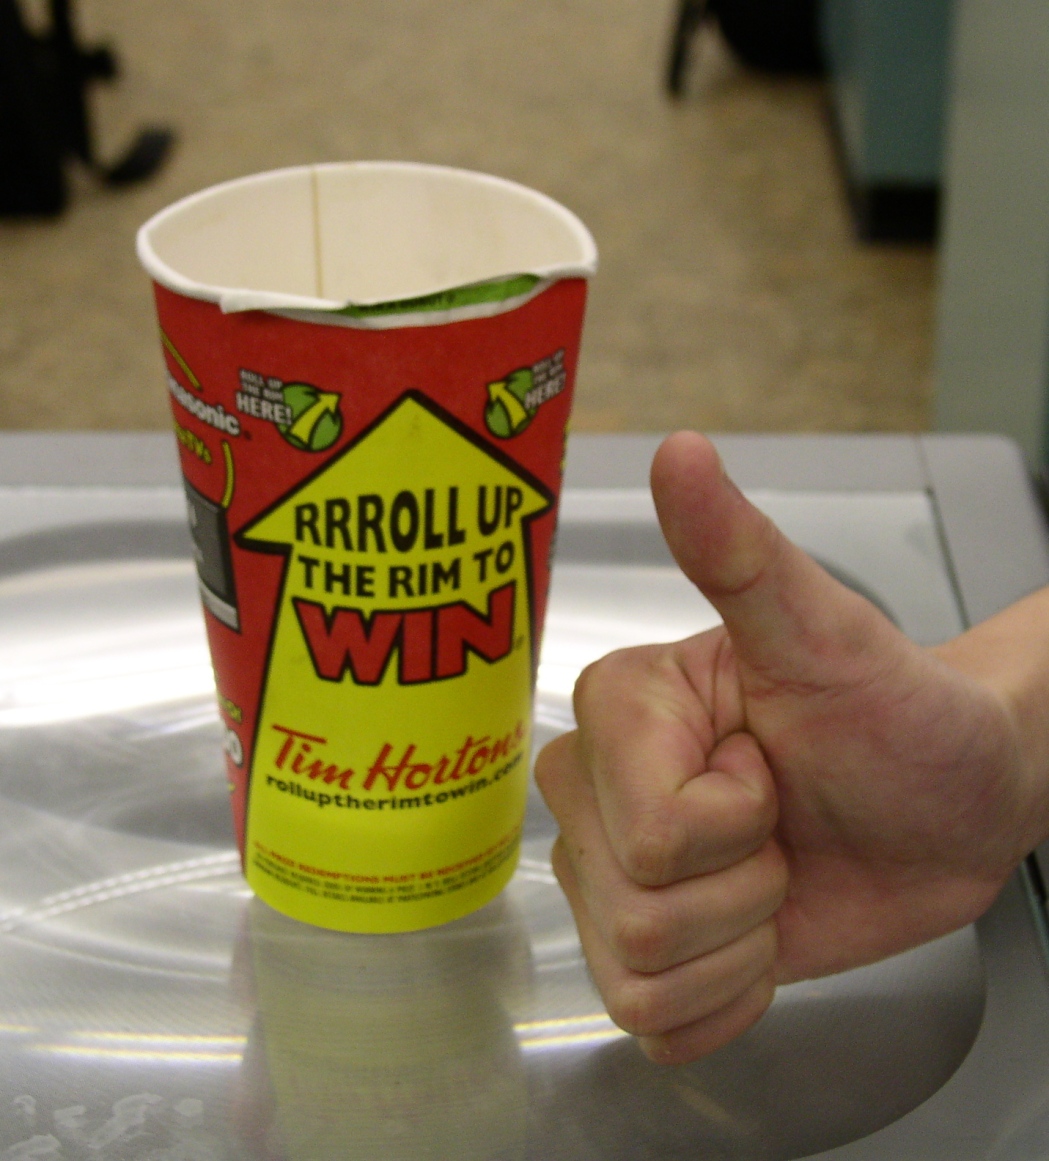 Roll up the Rim to win